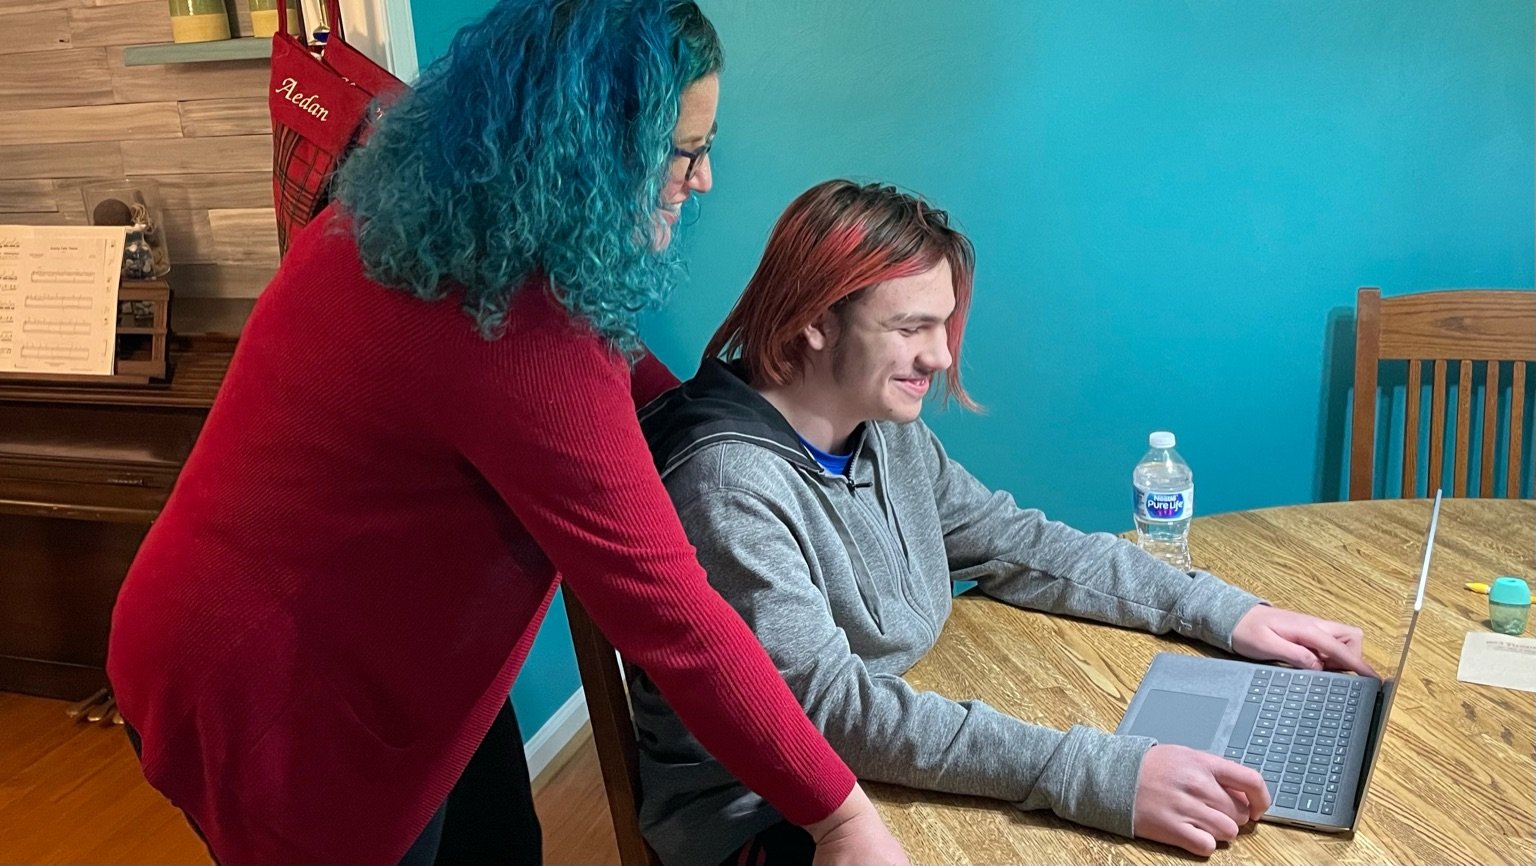 Pandemic parenting at its best: woman with blue hair and red sweater stands and leans over seated boy with long red hair who is smiling while looking at laptop on the table in front of him